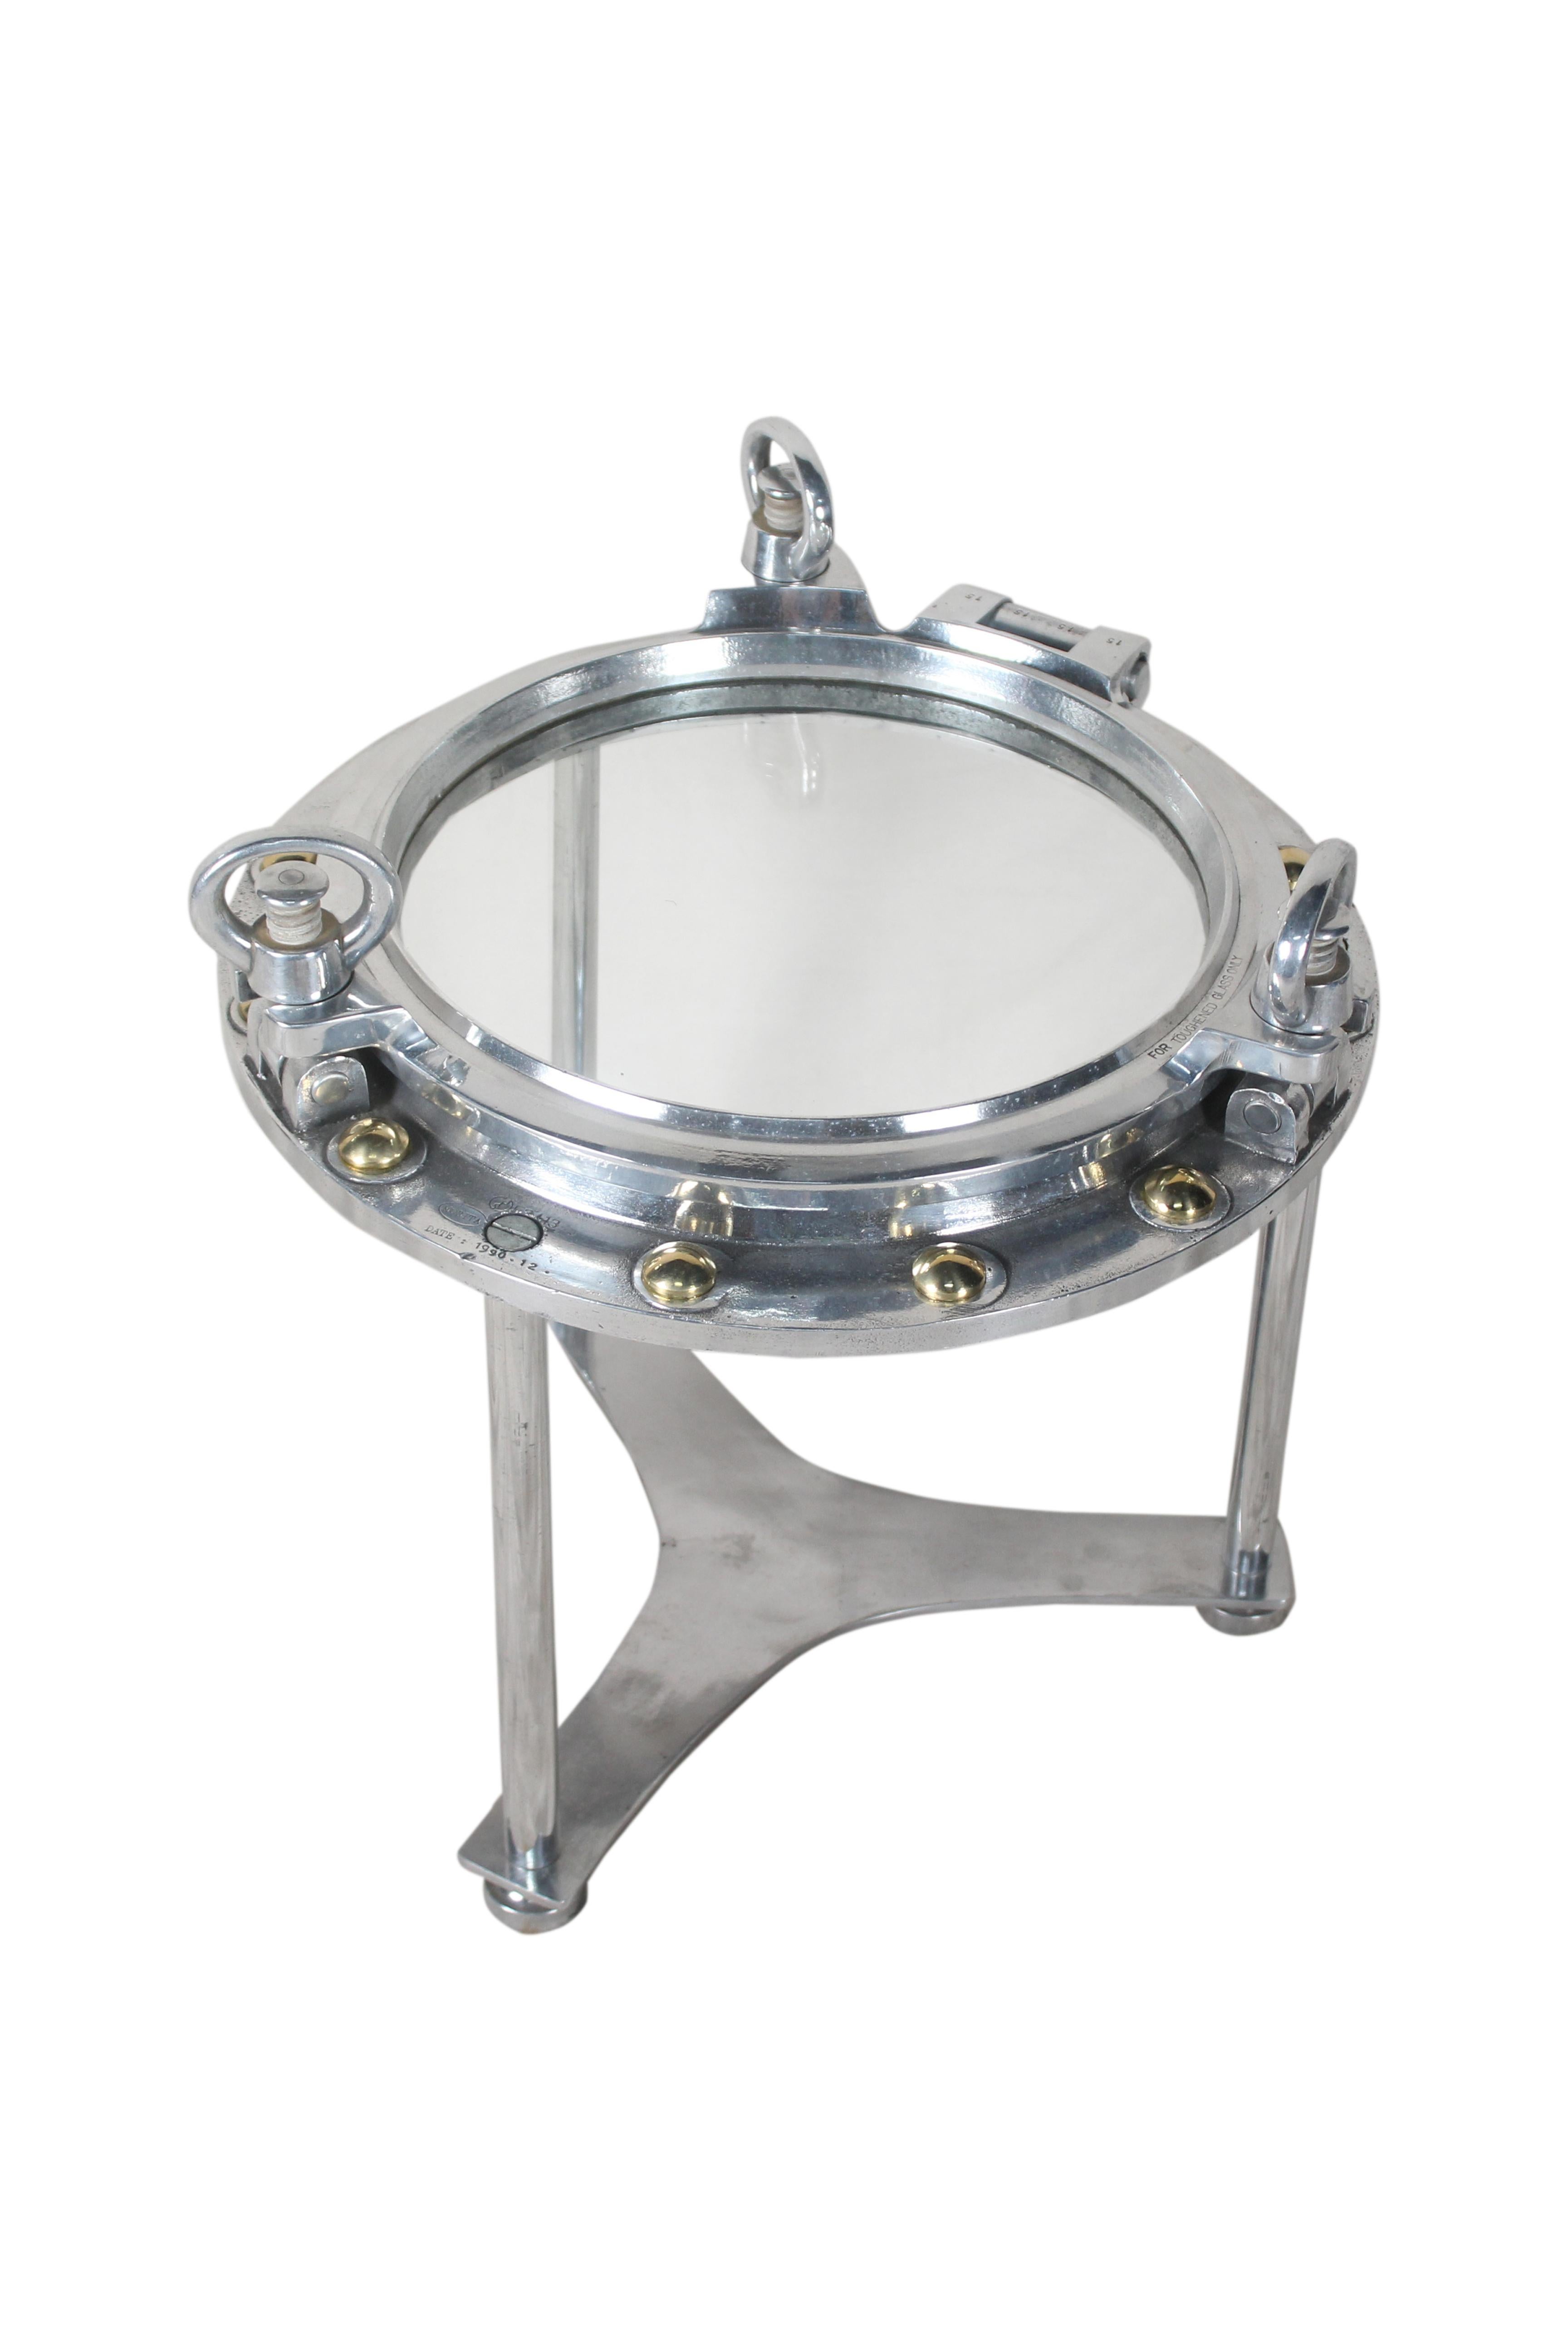 Industrial Ship's Nautical Porthole Coffee Table or Side Table By Deborah Lockhart Phillips